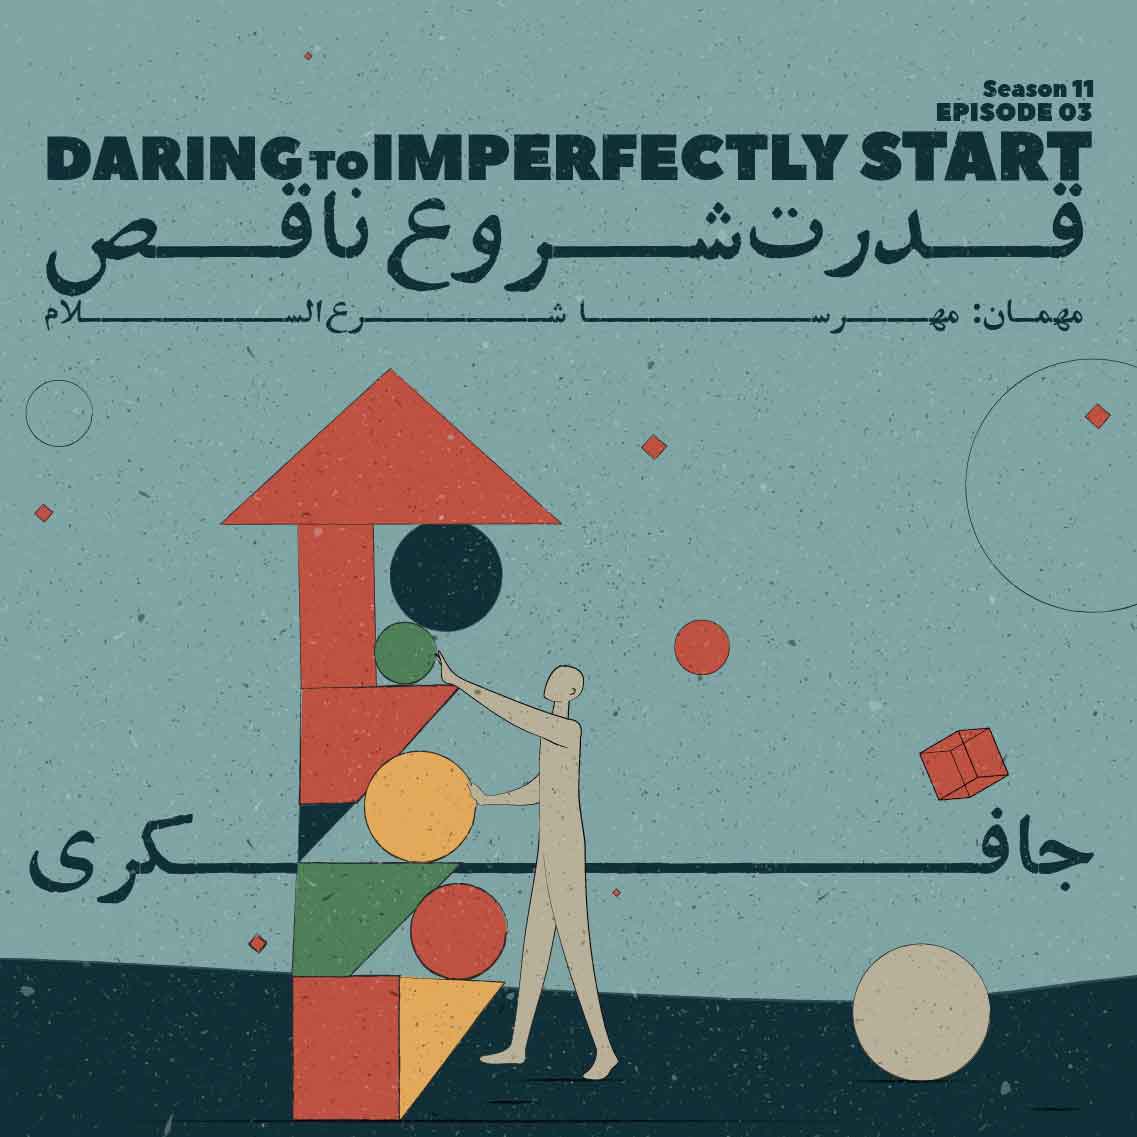 Episode 03 - Daring to imperfectly start (قدرت شروع ناقص)